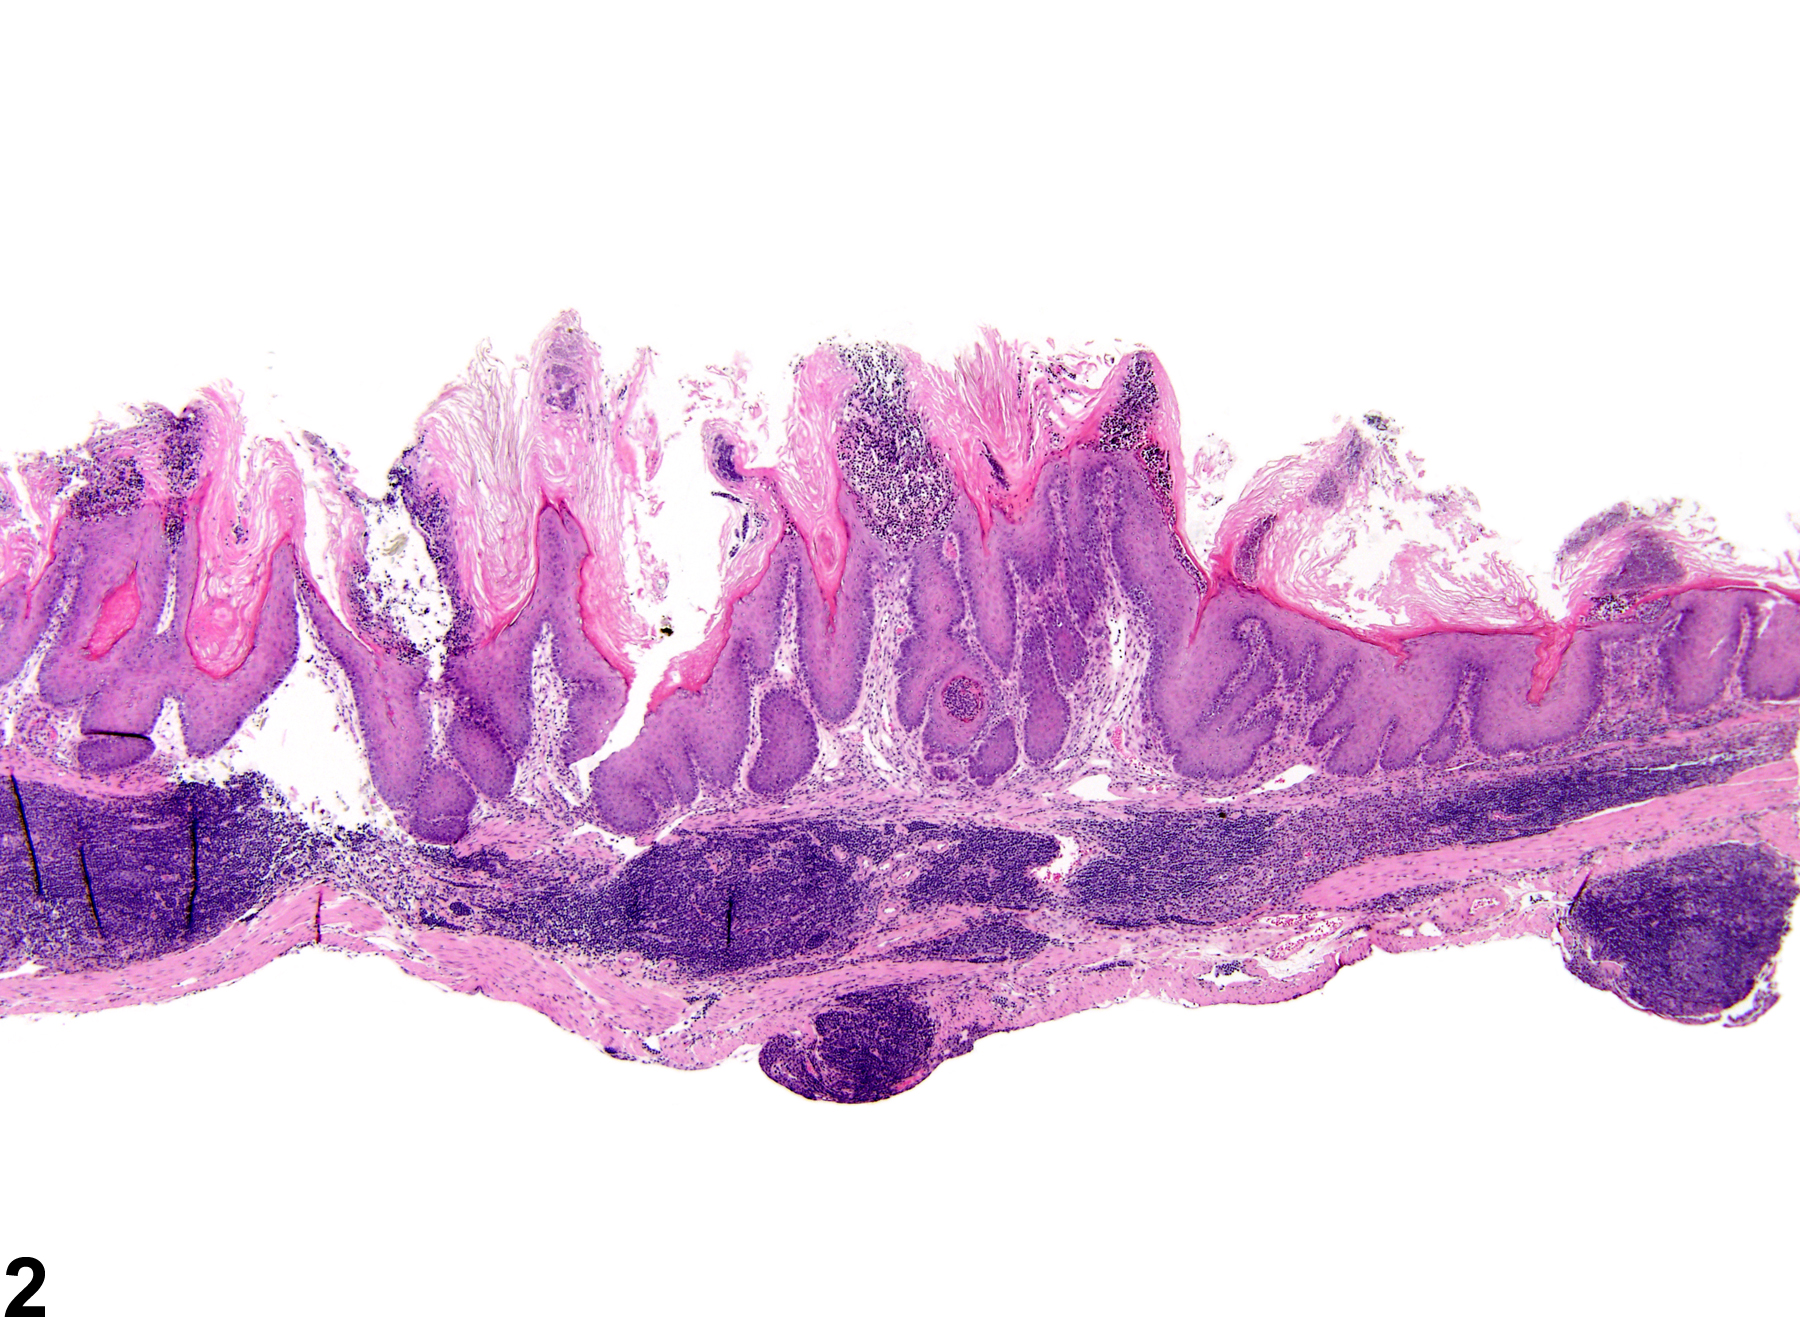 Image of inflammation in the forestomach from a female B6C3F1 mouse in a chronic study